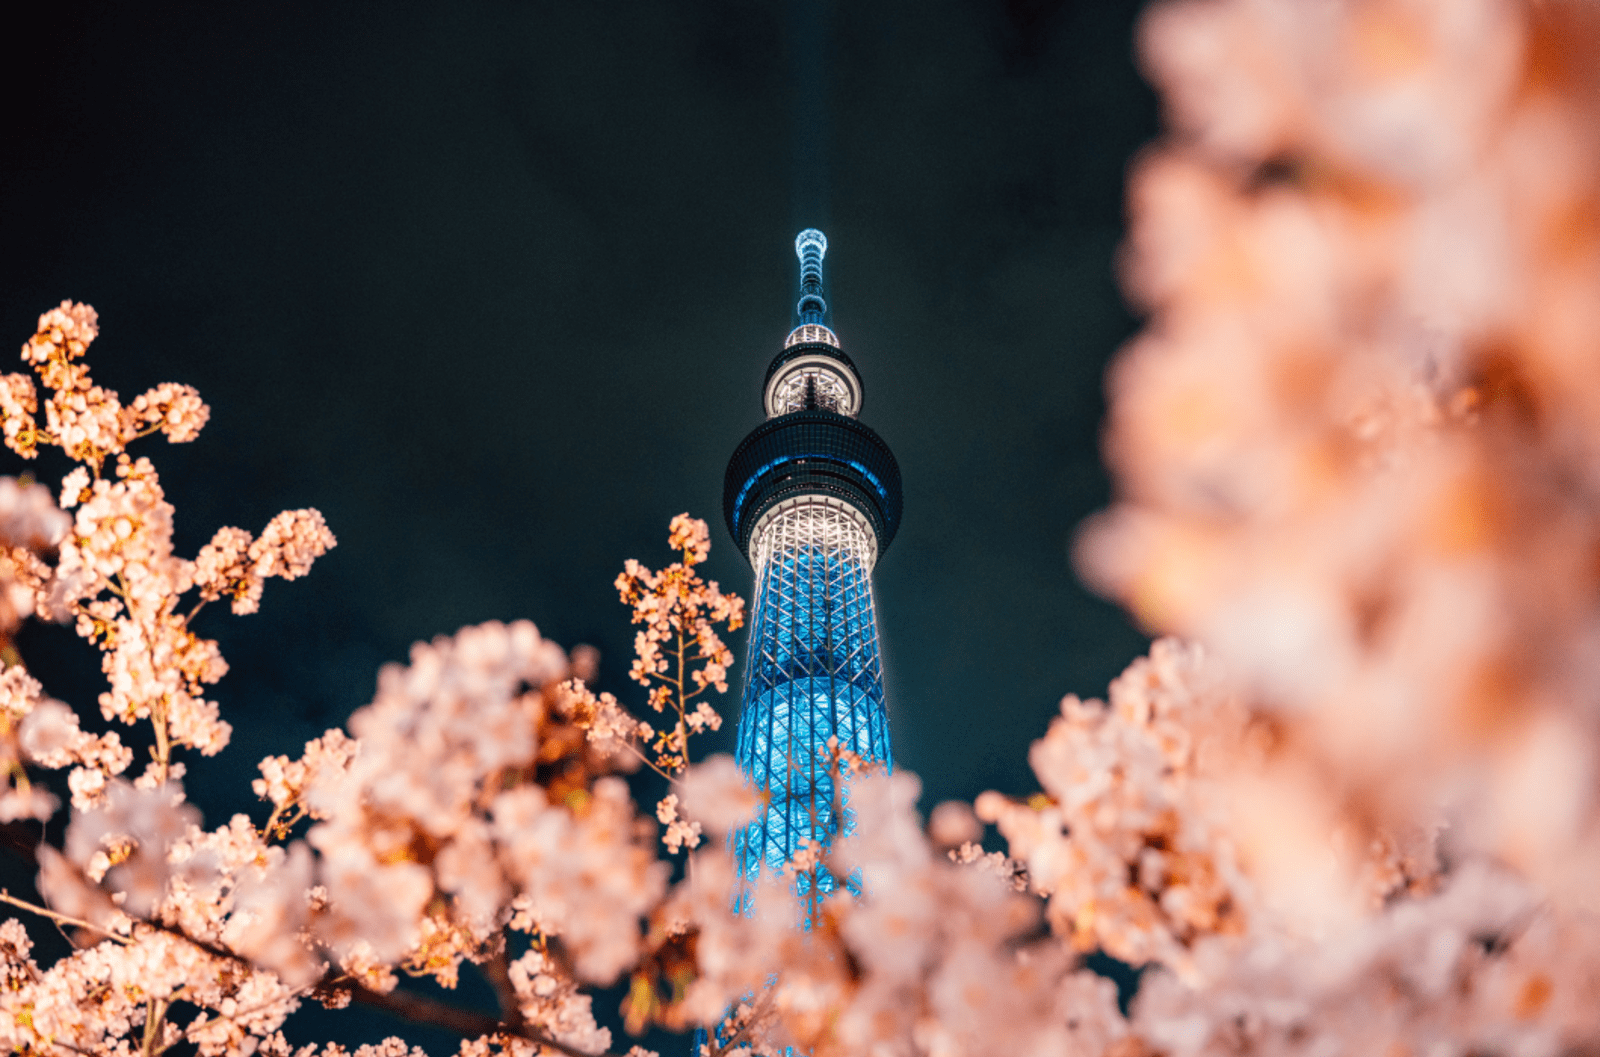 Tower at night lit up with blue light surrounded by cherry blossoms